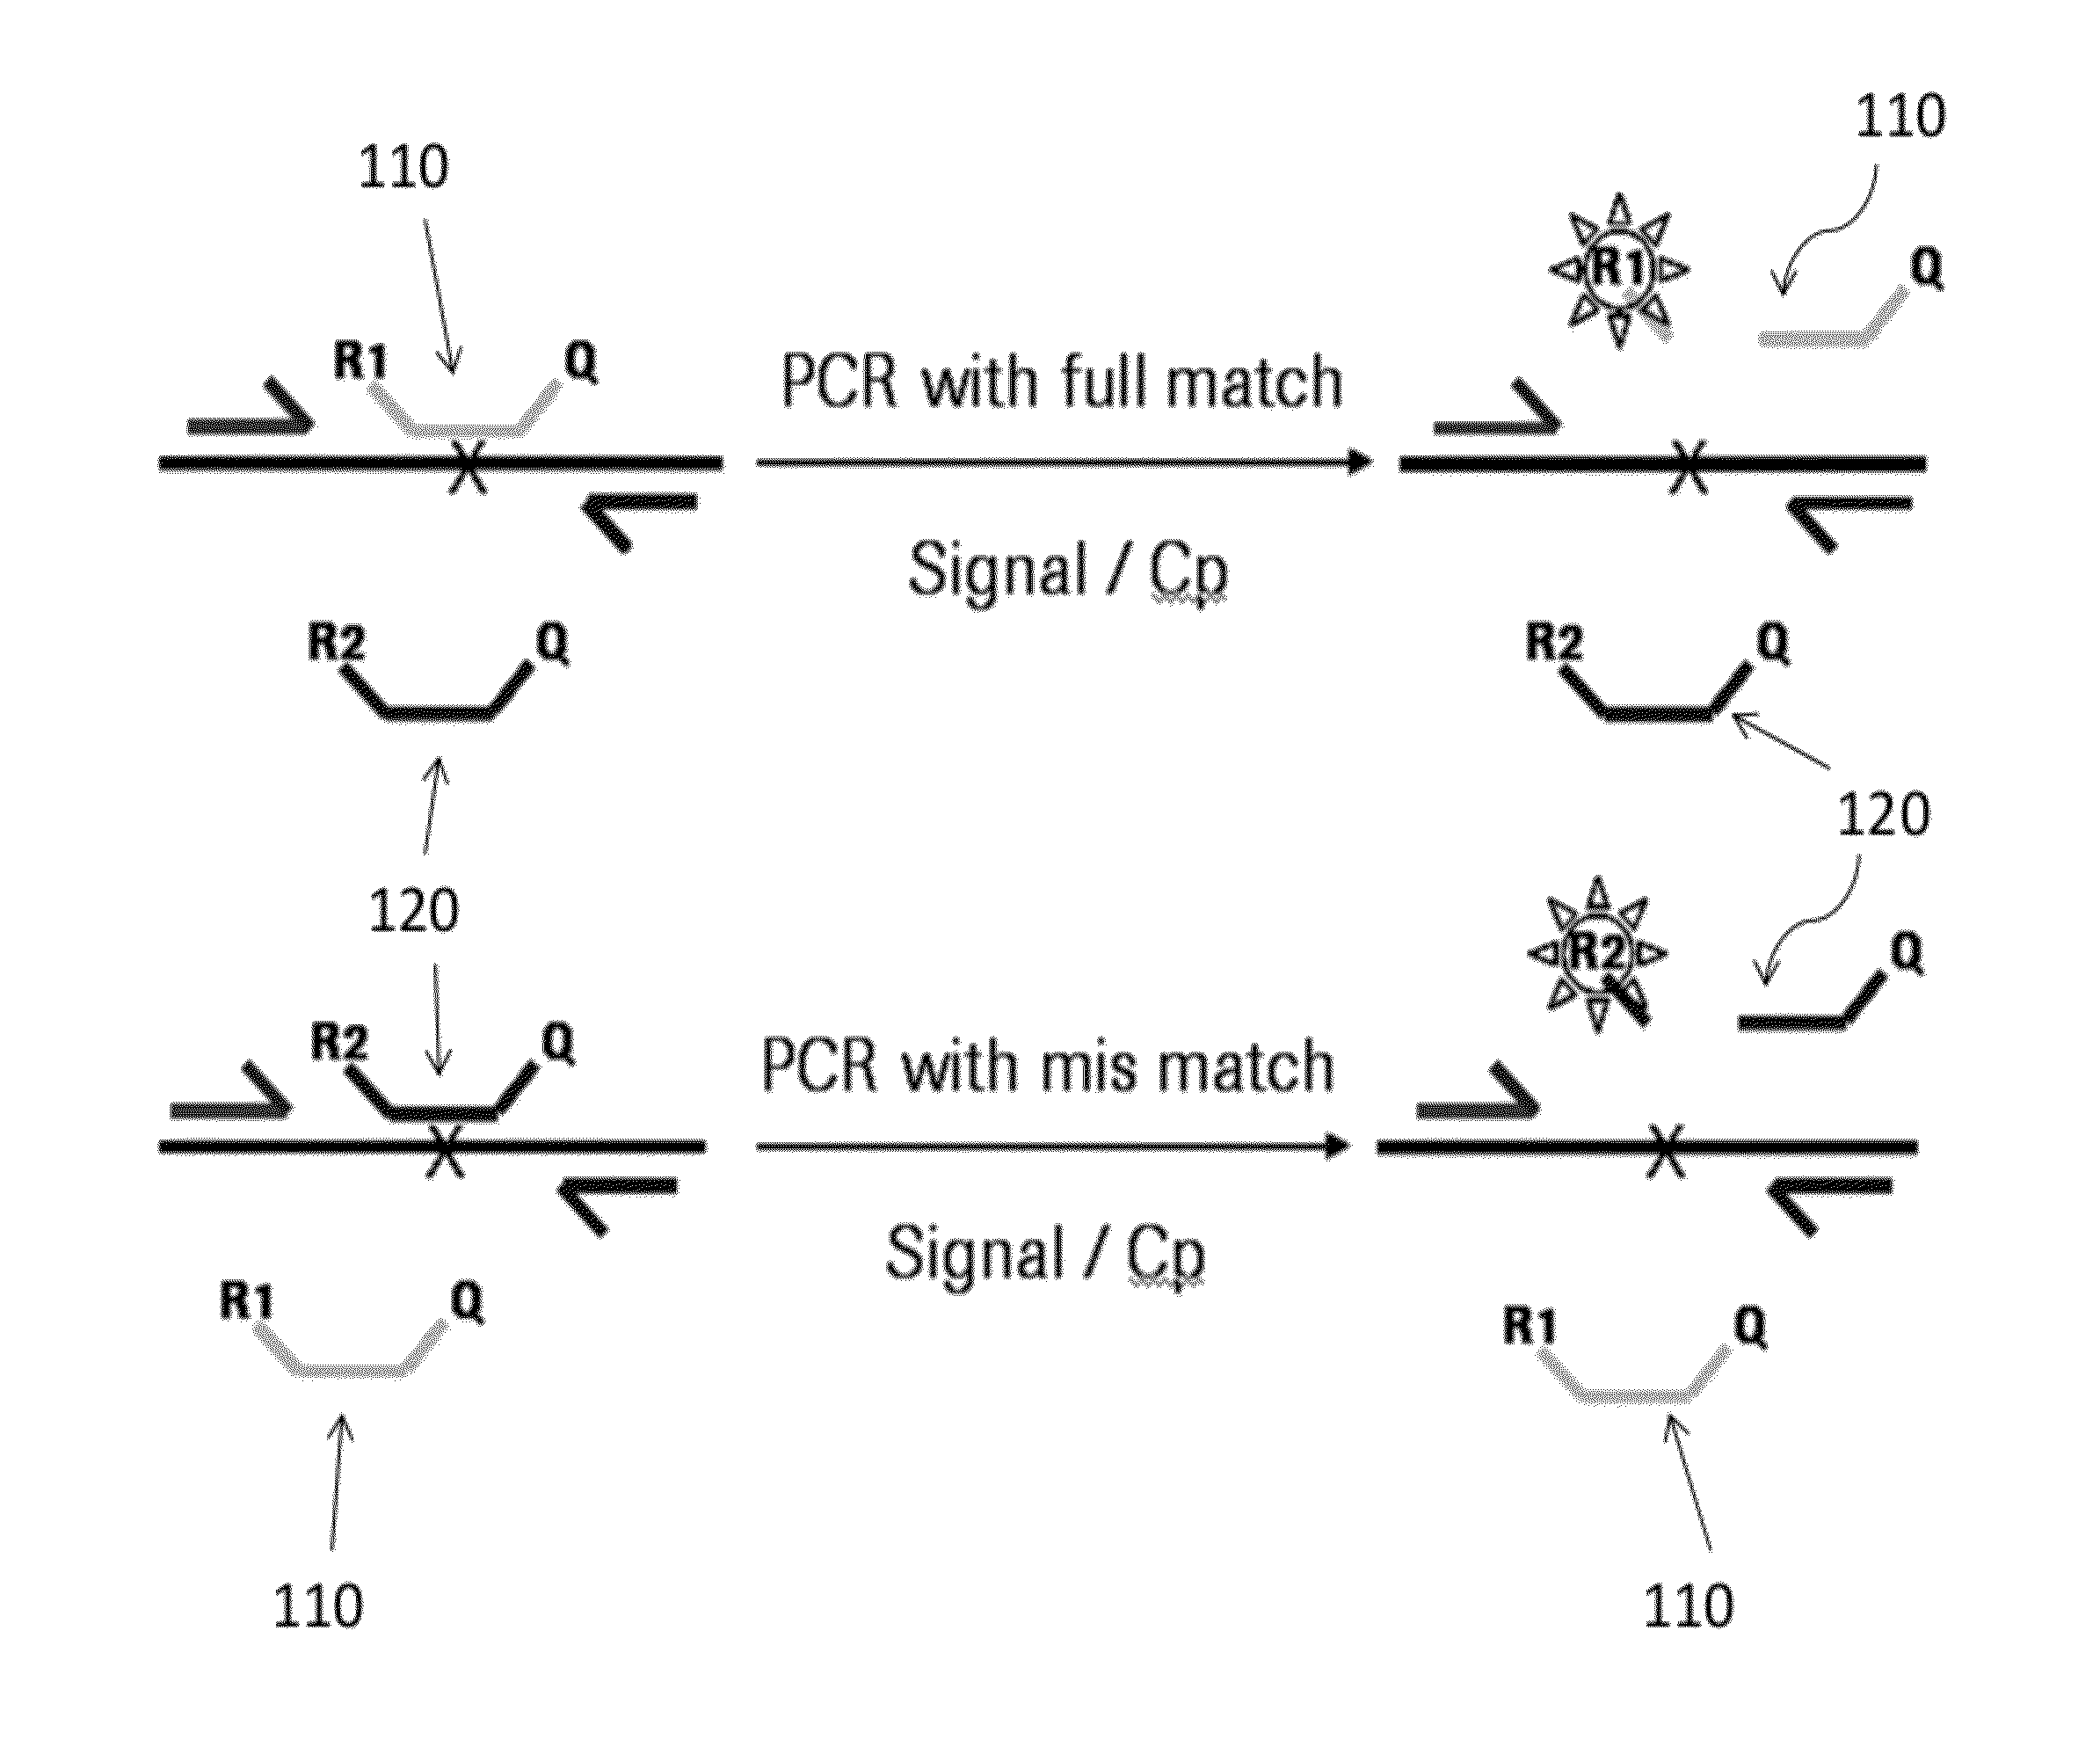 Type of universal probe for the detection of genomic variants